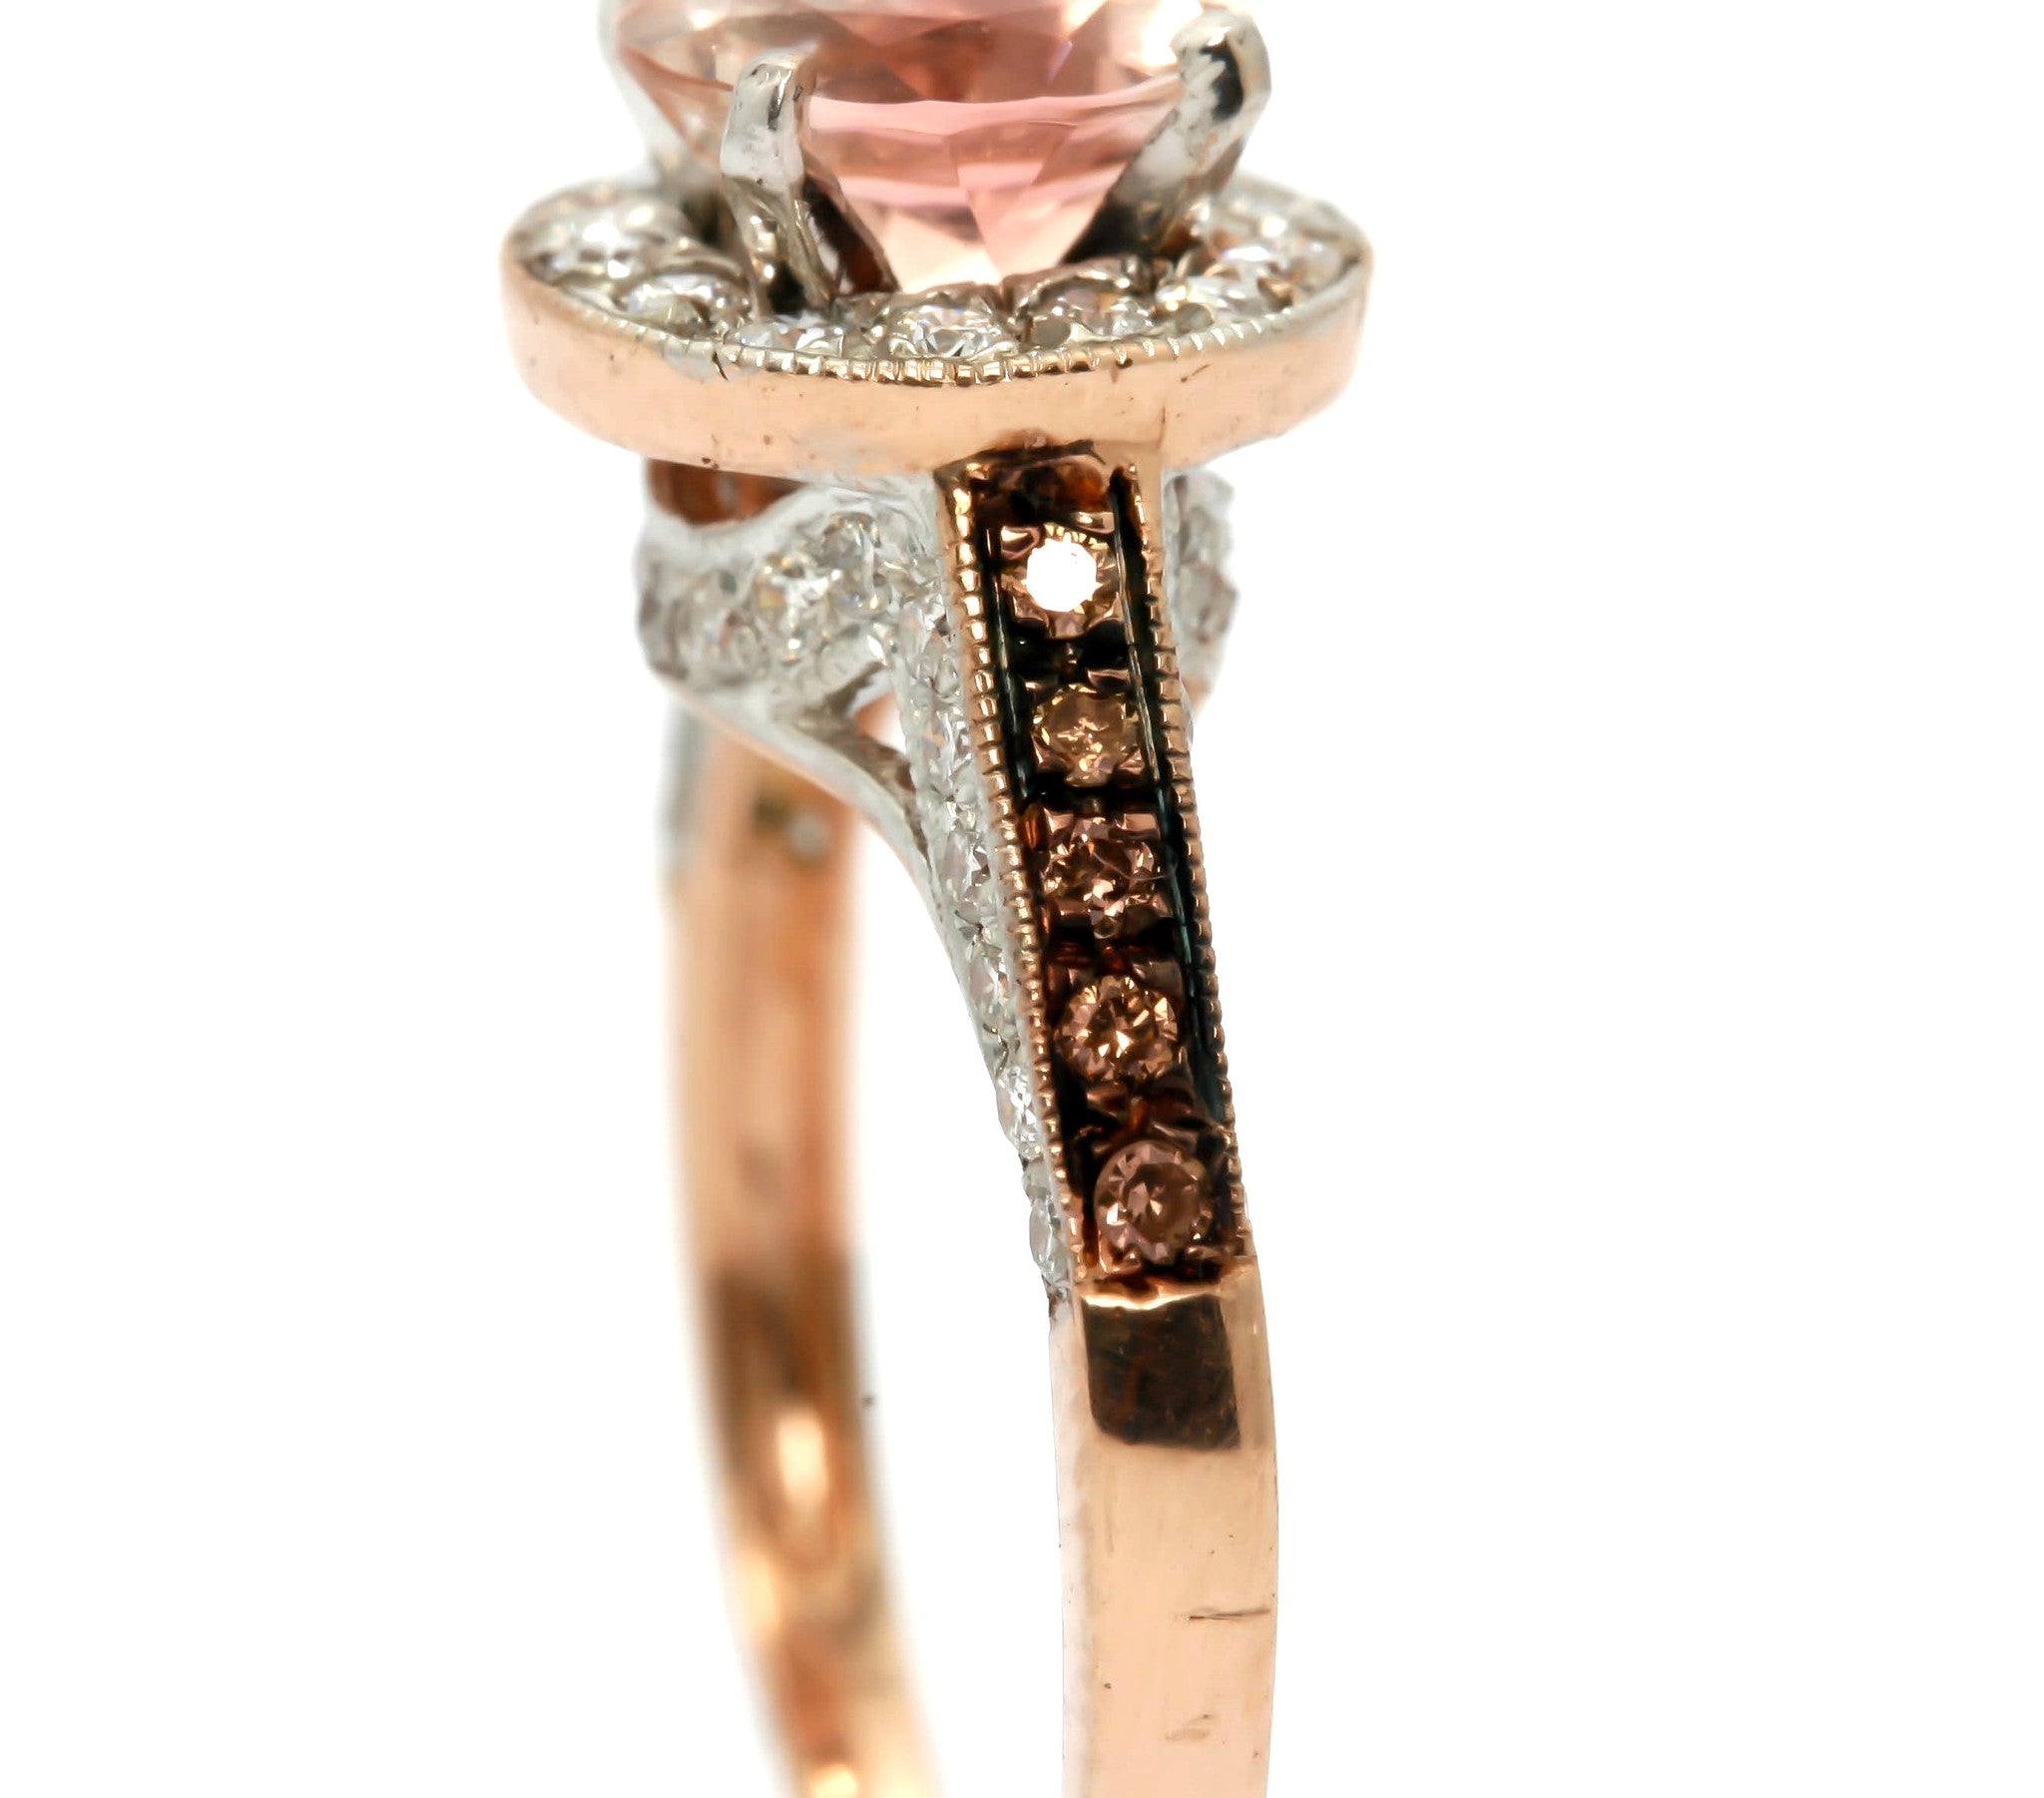 Morganite Engagement Ring, Unique 1 Carat Floating Halo Rose Gold, White & Brown Diamonds, Anniversary Ring MG94613